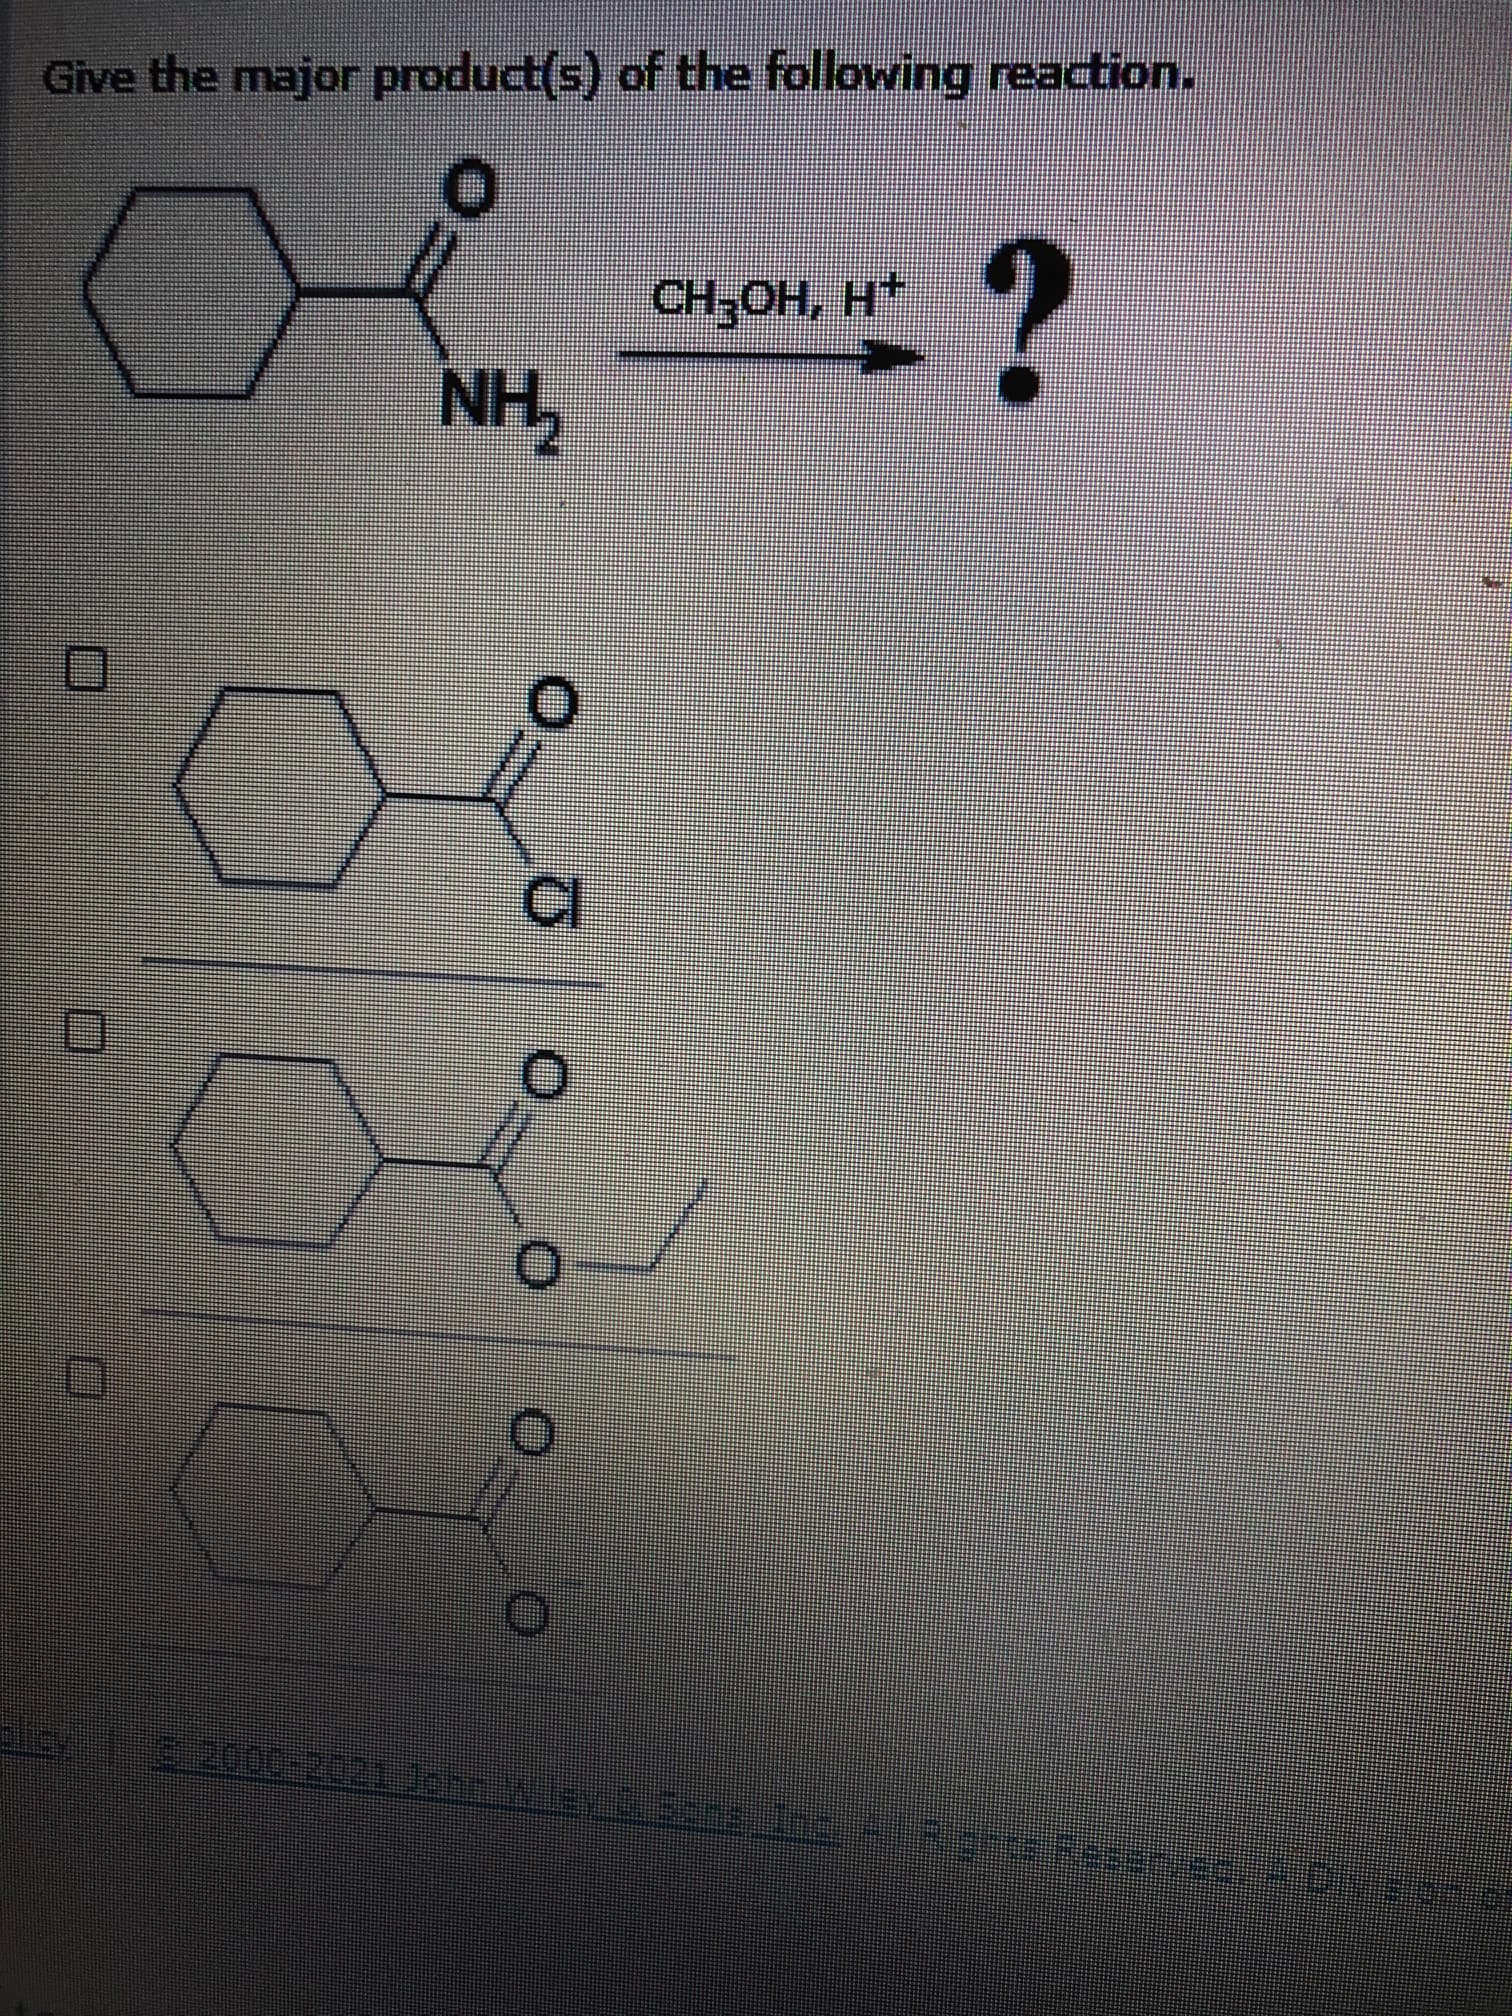 ive the major product(s) of the following reaction.
CH,OH, H*
NH,
